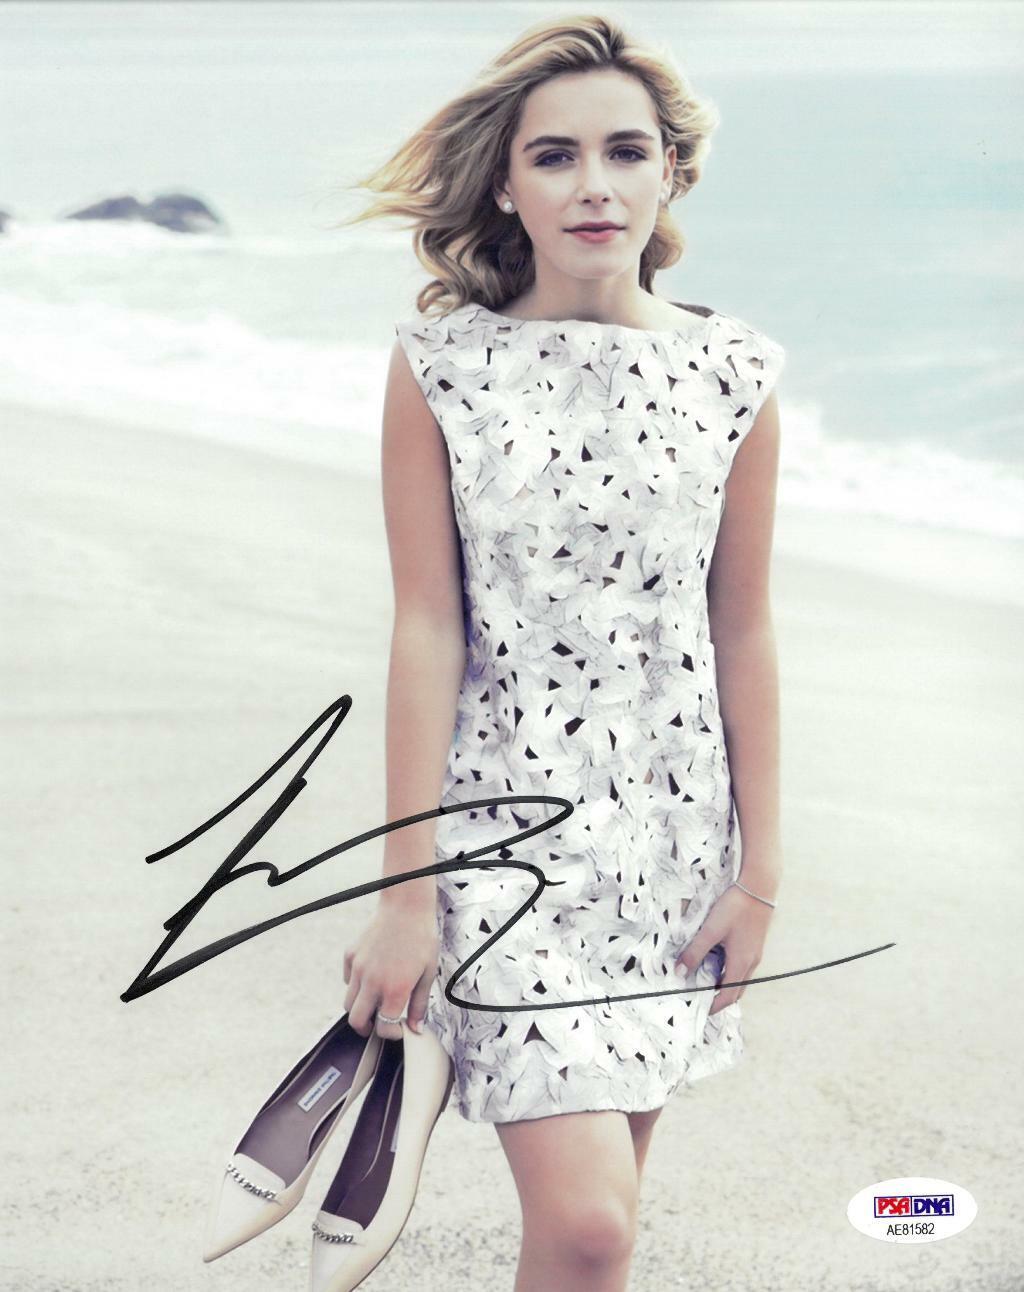 Kiernan Shipka Signed Authentic Autographed 8x10 Photo Poster painting PSA/DNA #AE81582